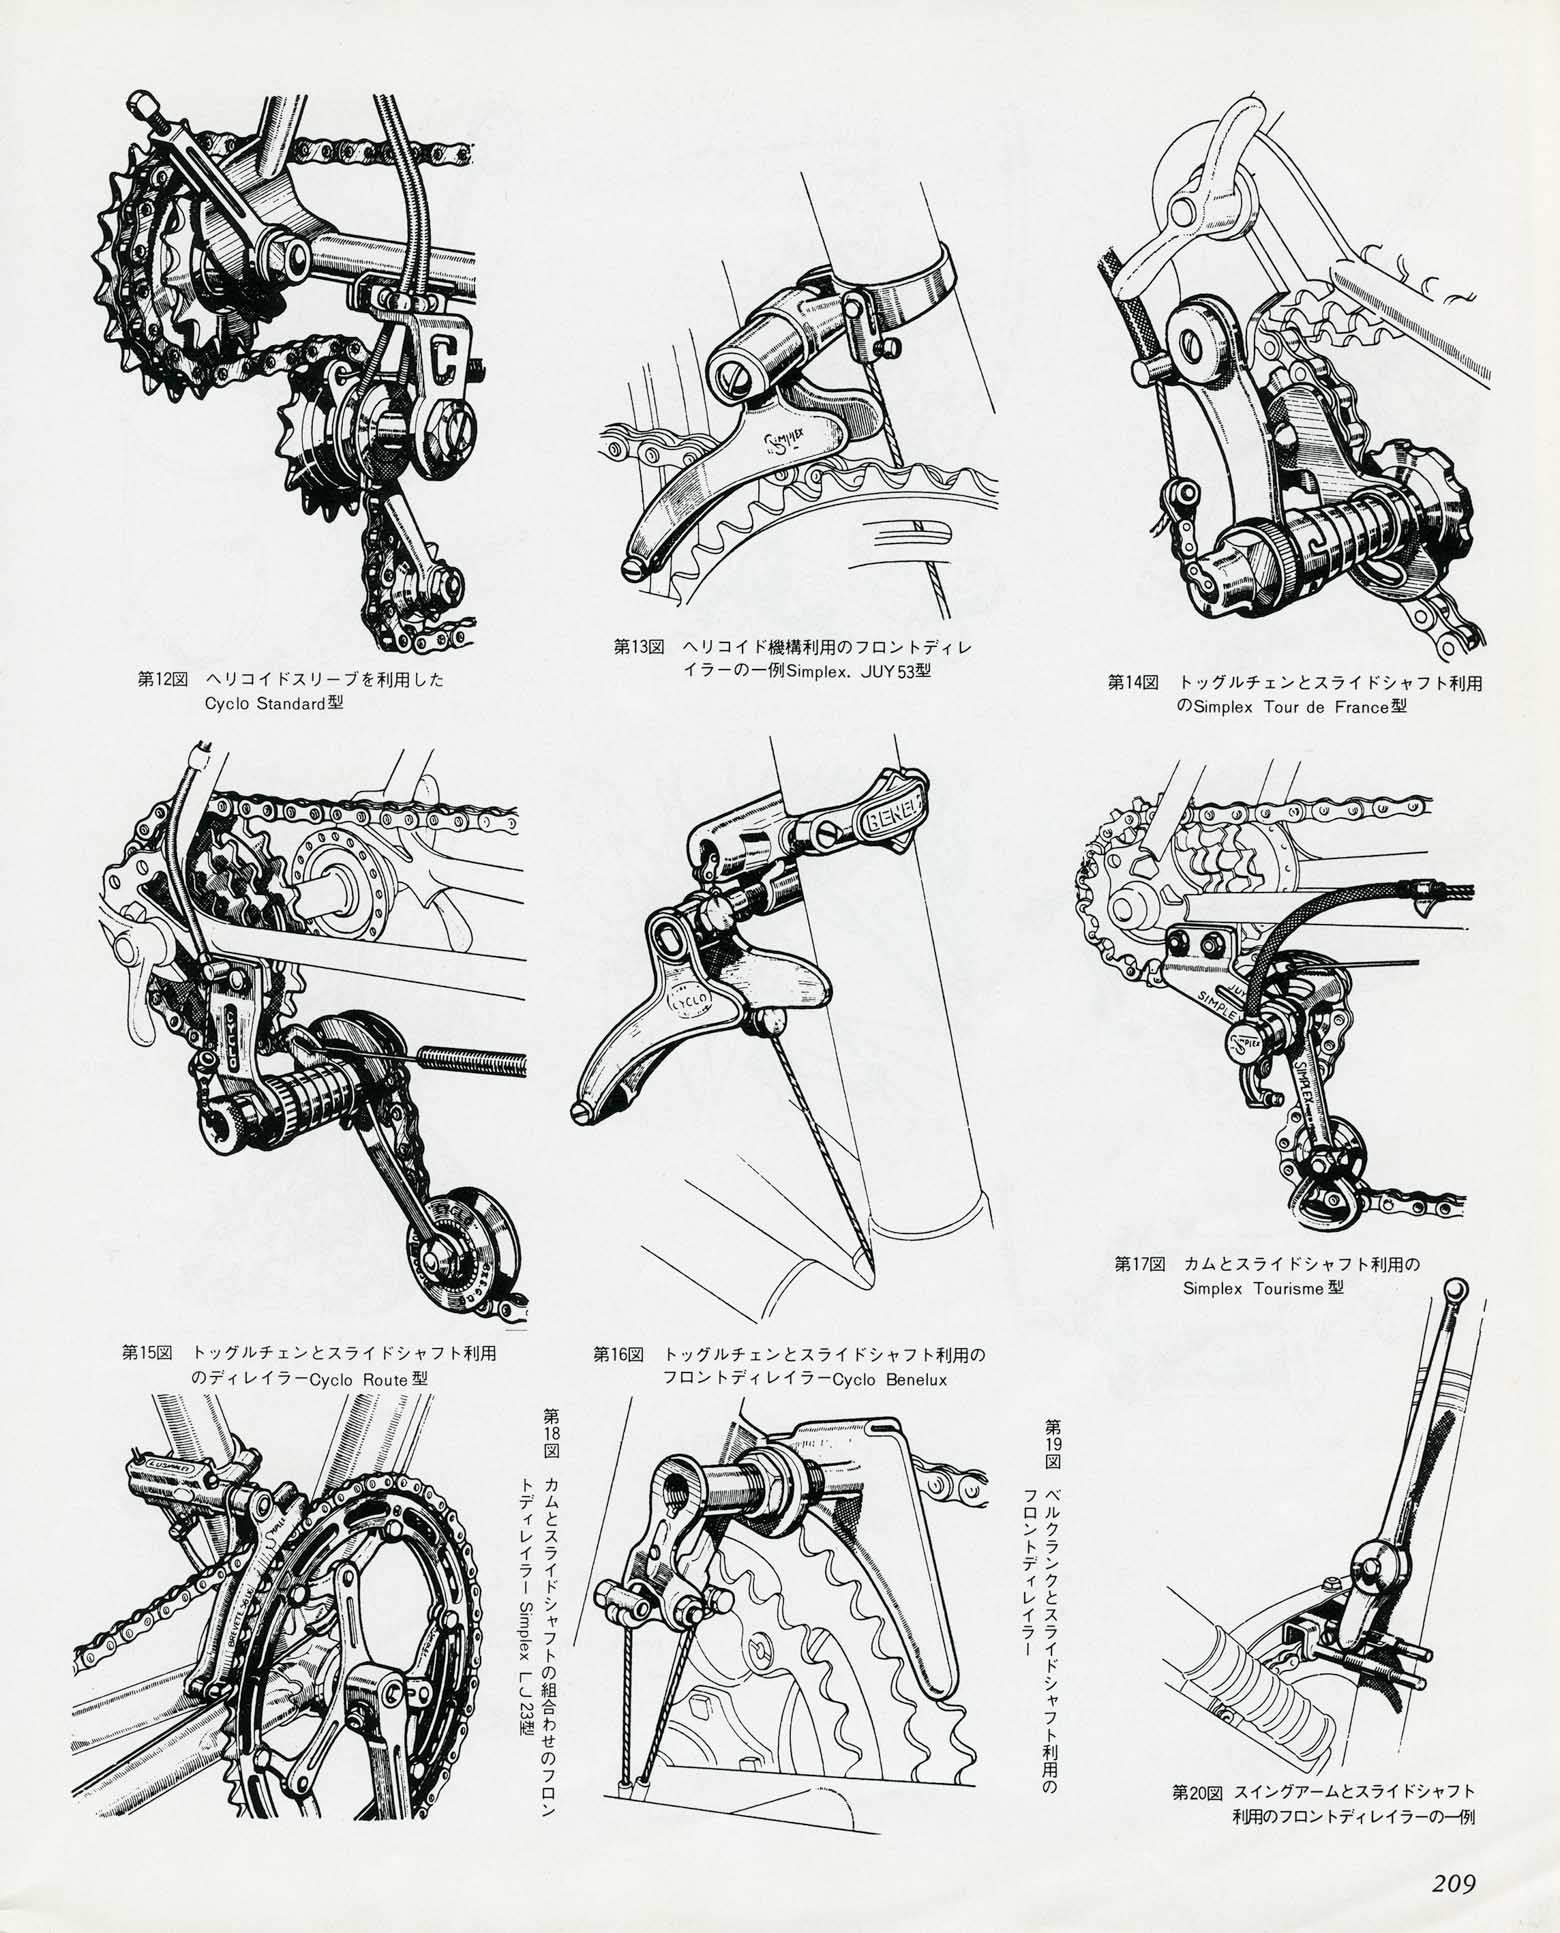 New Cycling May 1981 - Derailleur Collection page 209 main image